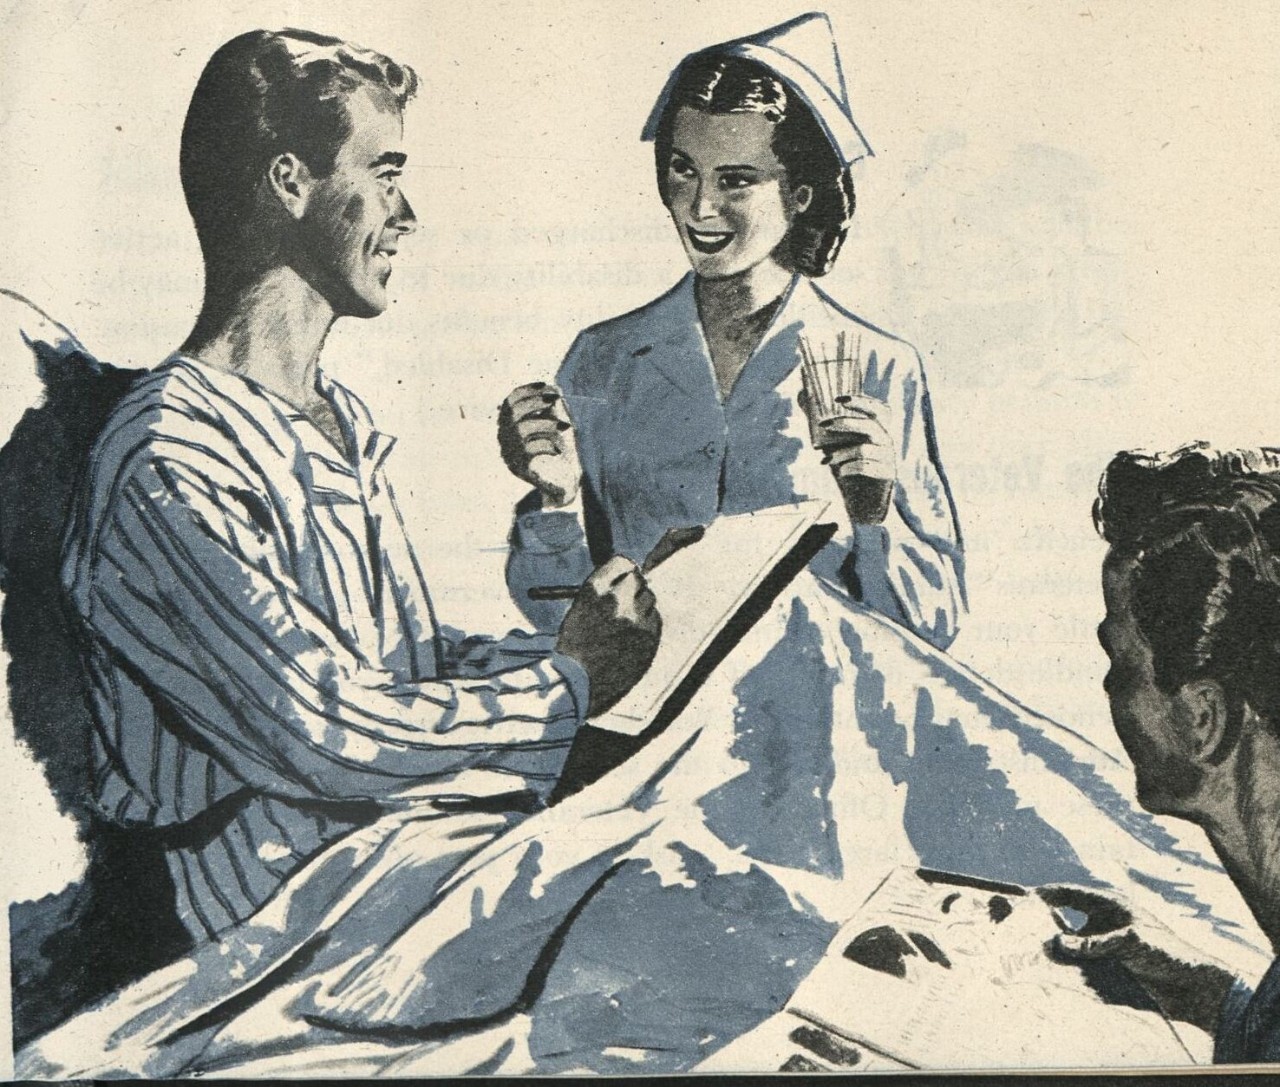 Drawing a veteran sitting up in his hospital bed holding a pad and pen conversing with a nurse - another man is shown seated with a magazine.